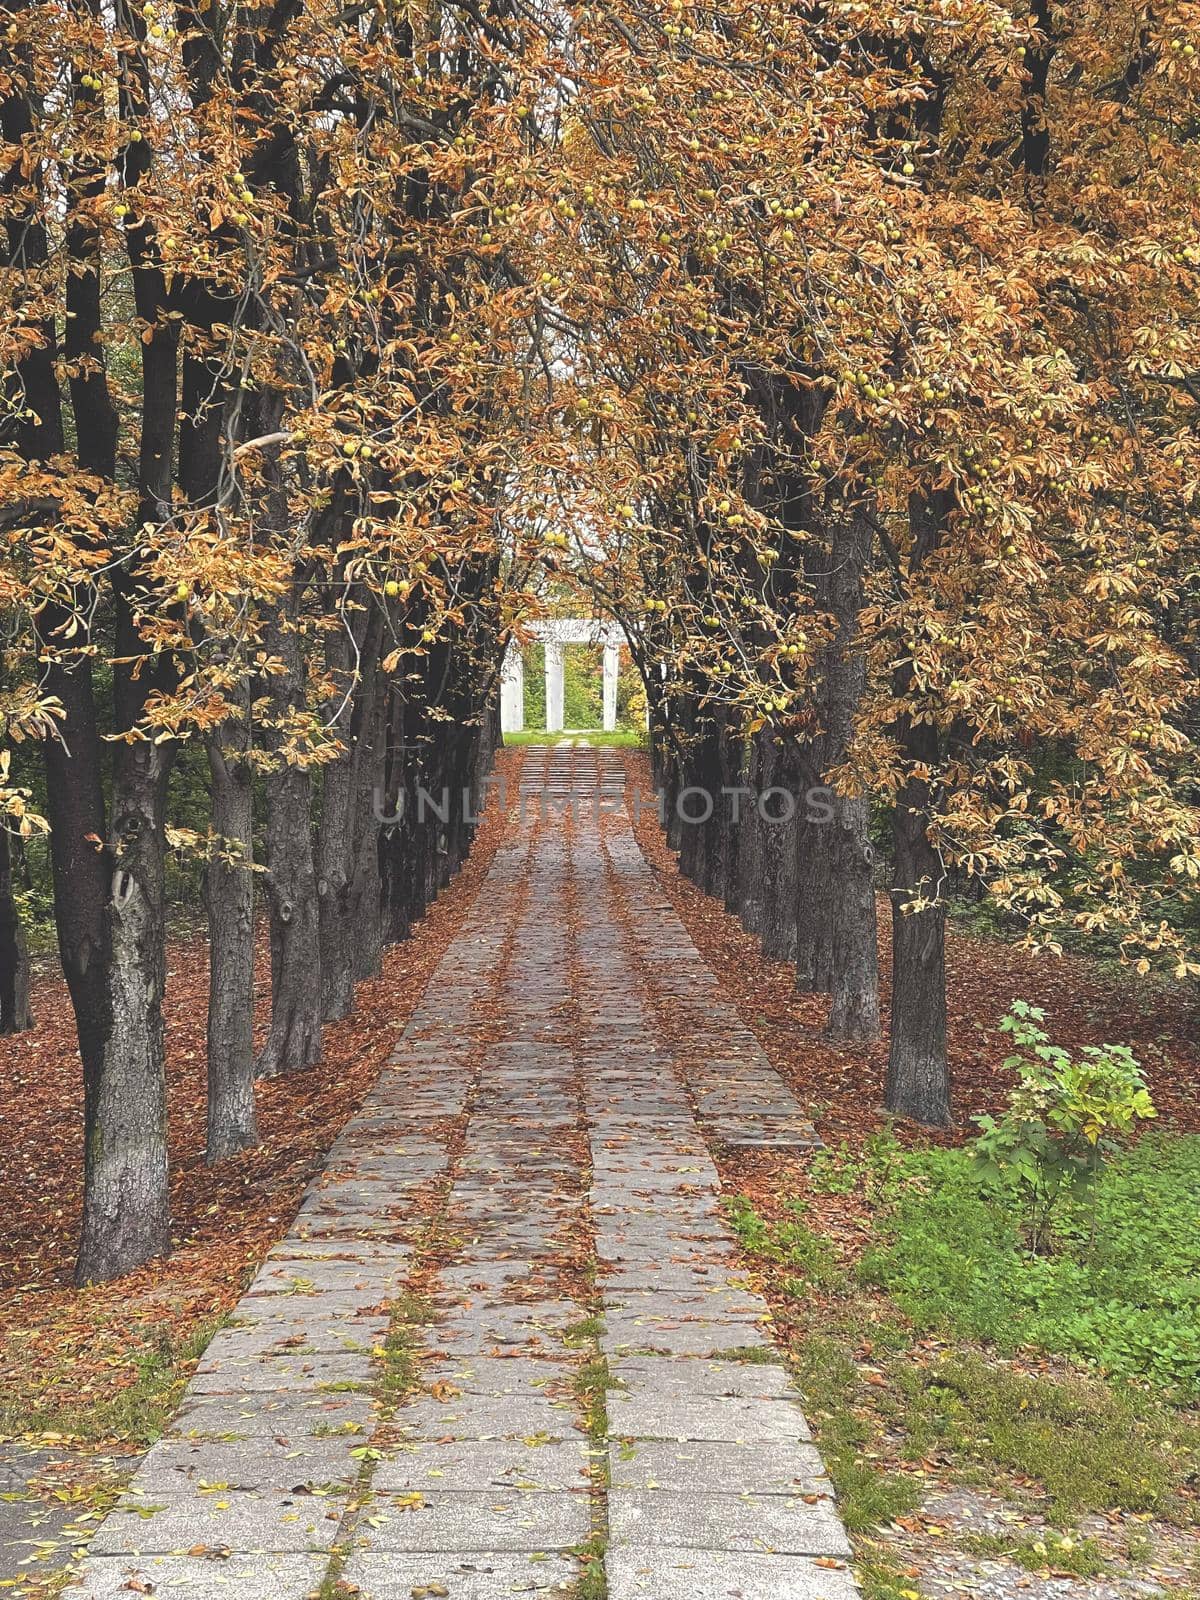 Vertical shot of an alley in autumn forest or park